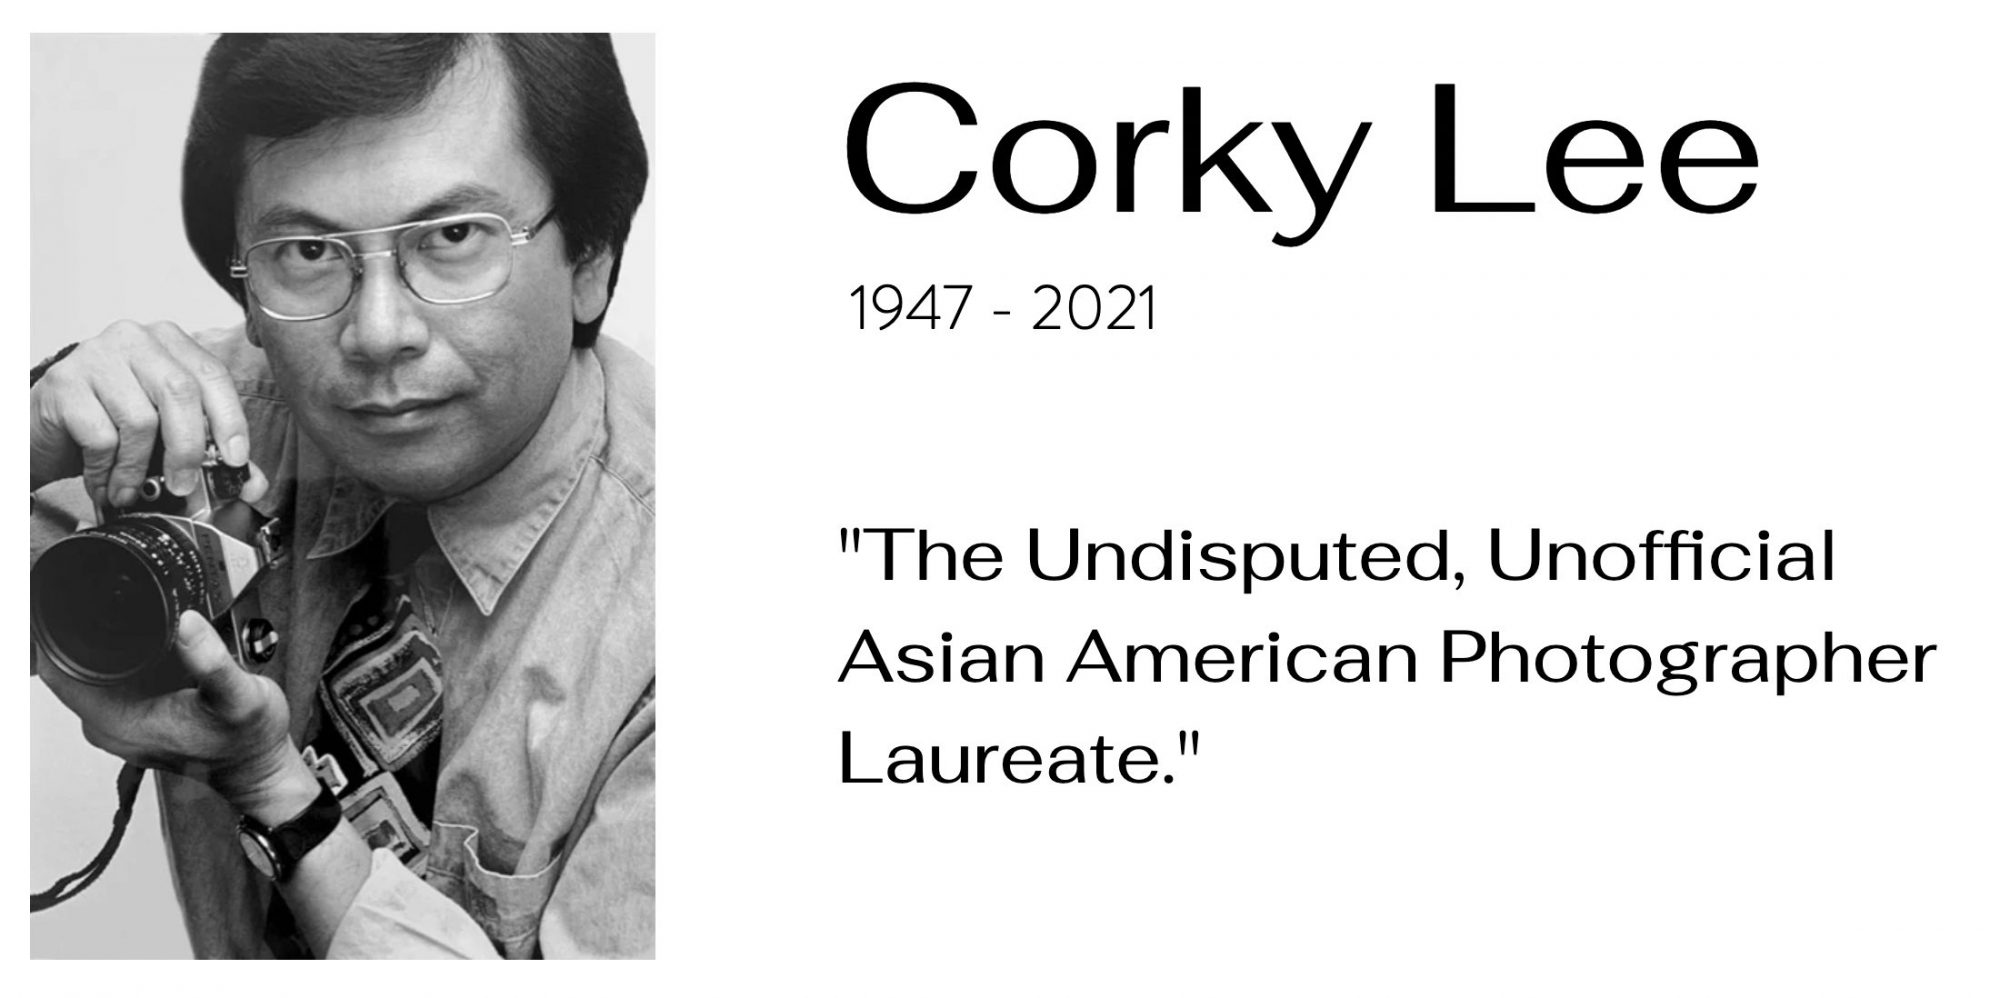 AABANY Thanks the Estate of Corky Lee for 